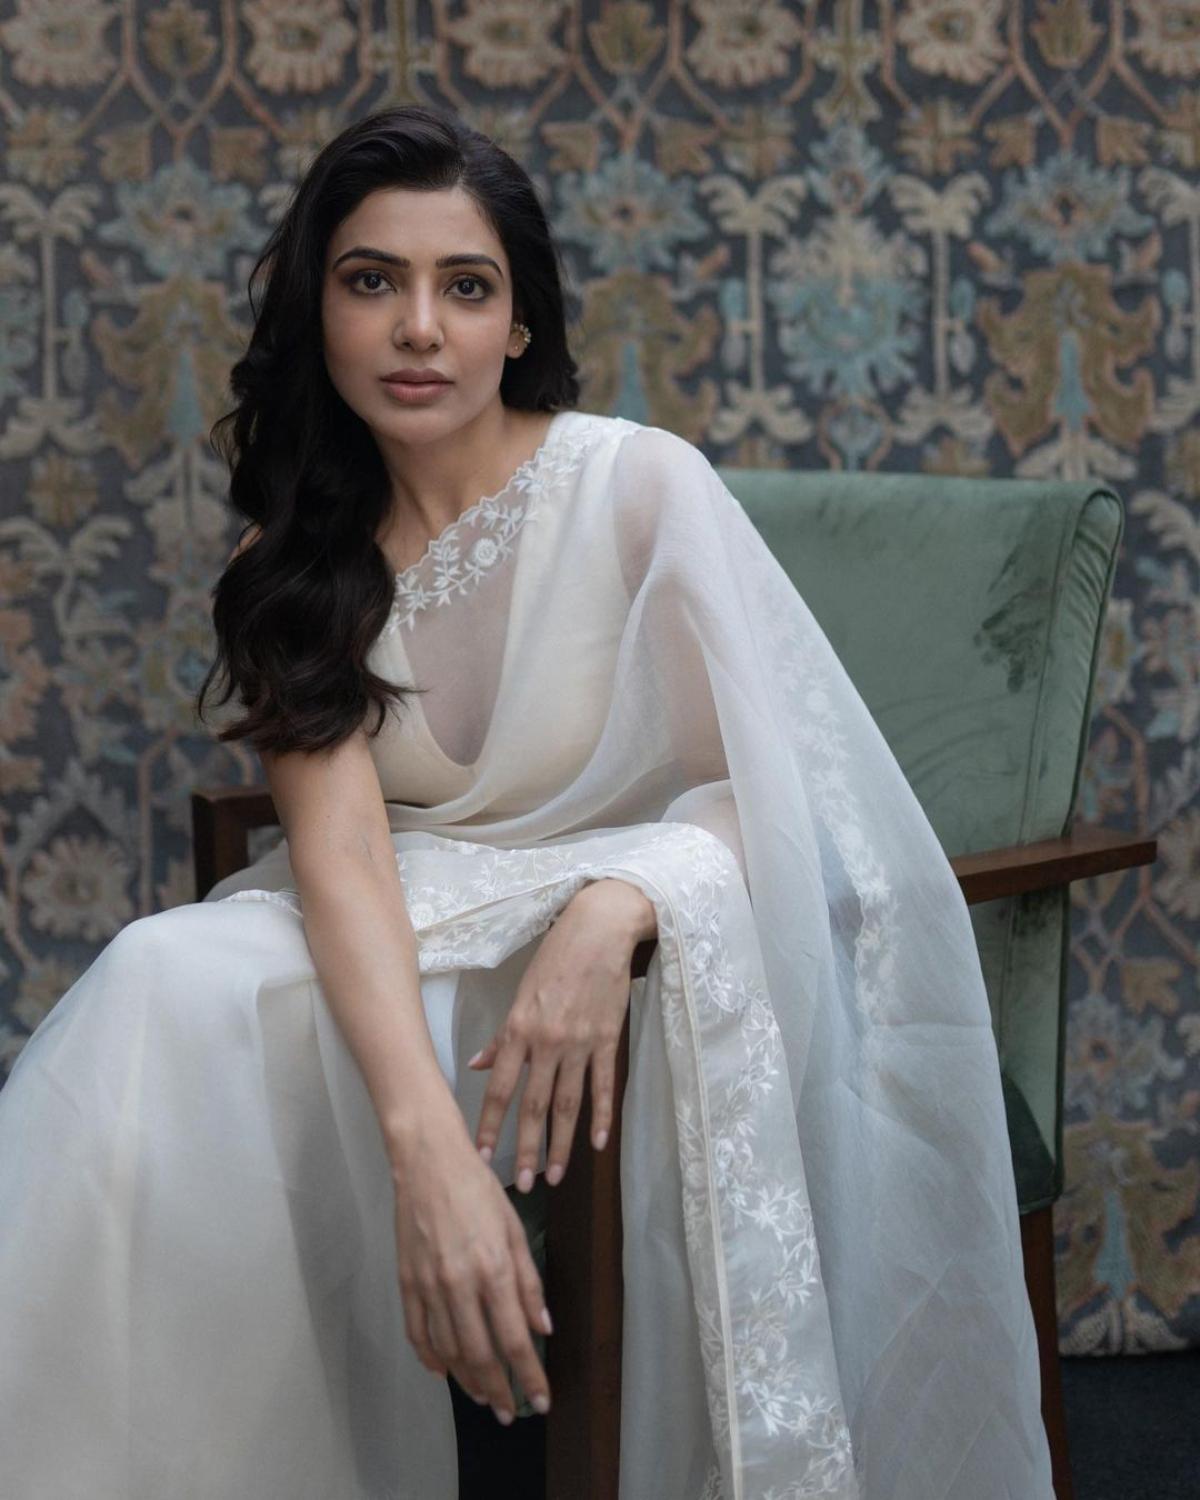 On the day of the trailer launch of 'Shaakuntalam', Samatha Ruth Prabu looked like a vision when she arrived wearing a simple, yet elegant bright white cotton saree. To give a modern spin to her traditional saree look, the actor wore a light beige crop-top-like blouse with a plunging v-shape neckline. The beautiful actor accessorised her saree look with nothing but a diamond-studded ear cuff and mini gold studs. The South beauty who kept her hair open with soft curls looked beamed with her inner beauty as she rocked a no-make-up look with her white saree. 